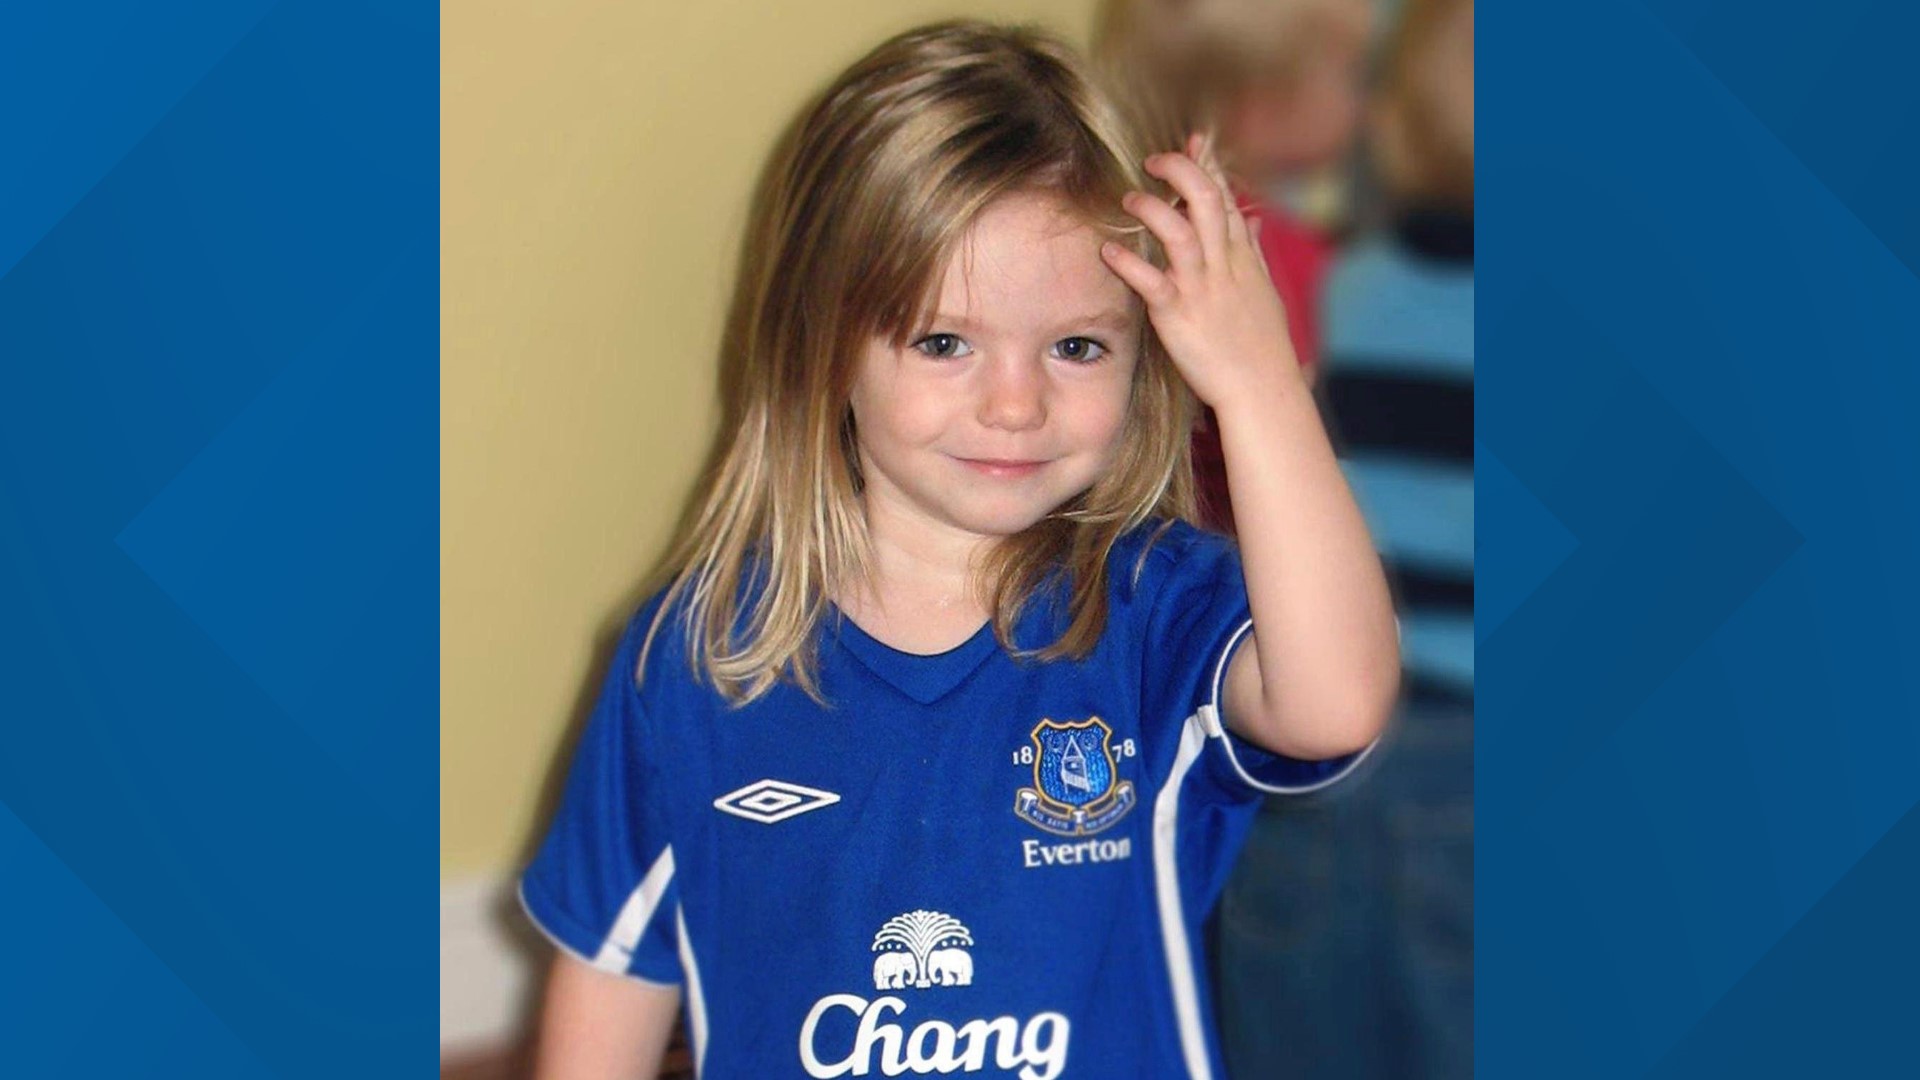 Madeleine McCann went missing at the age of 3 while on vacation with her family in Portugal.